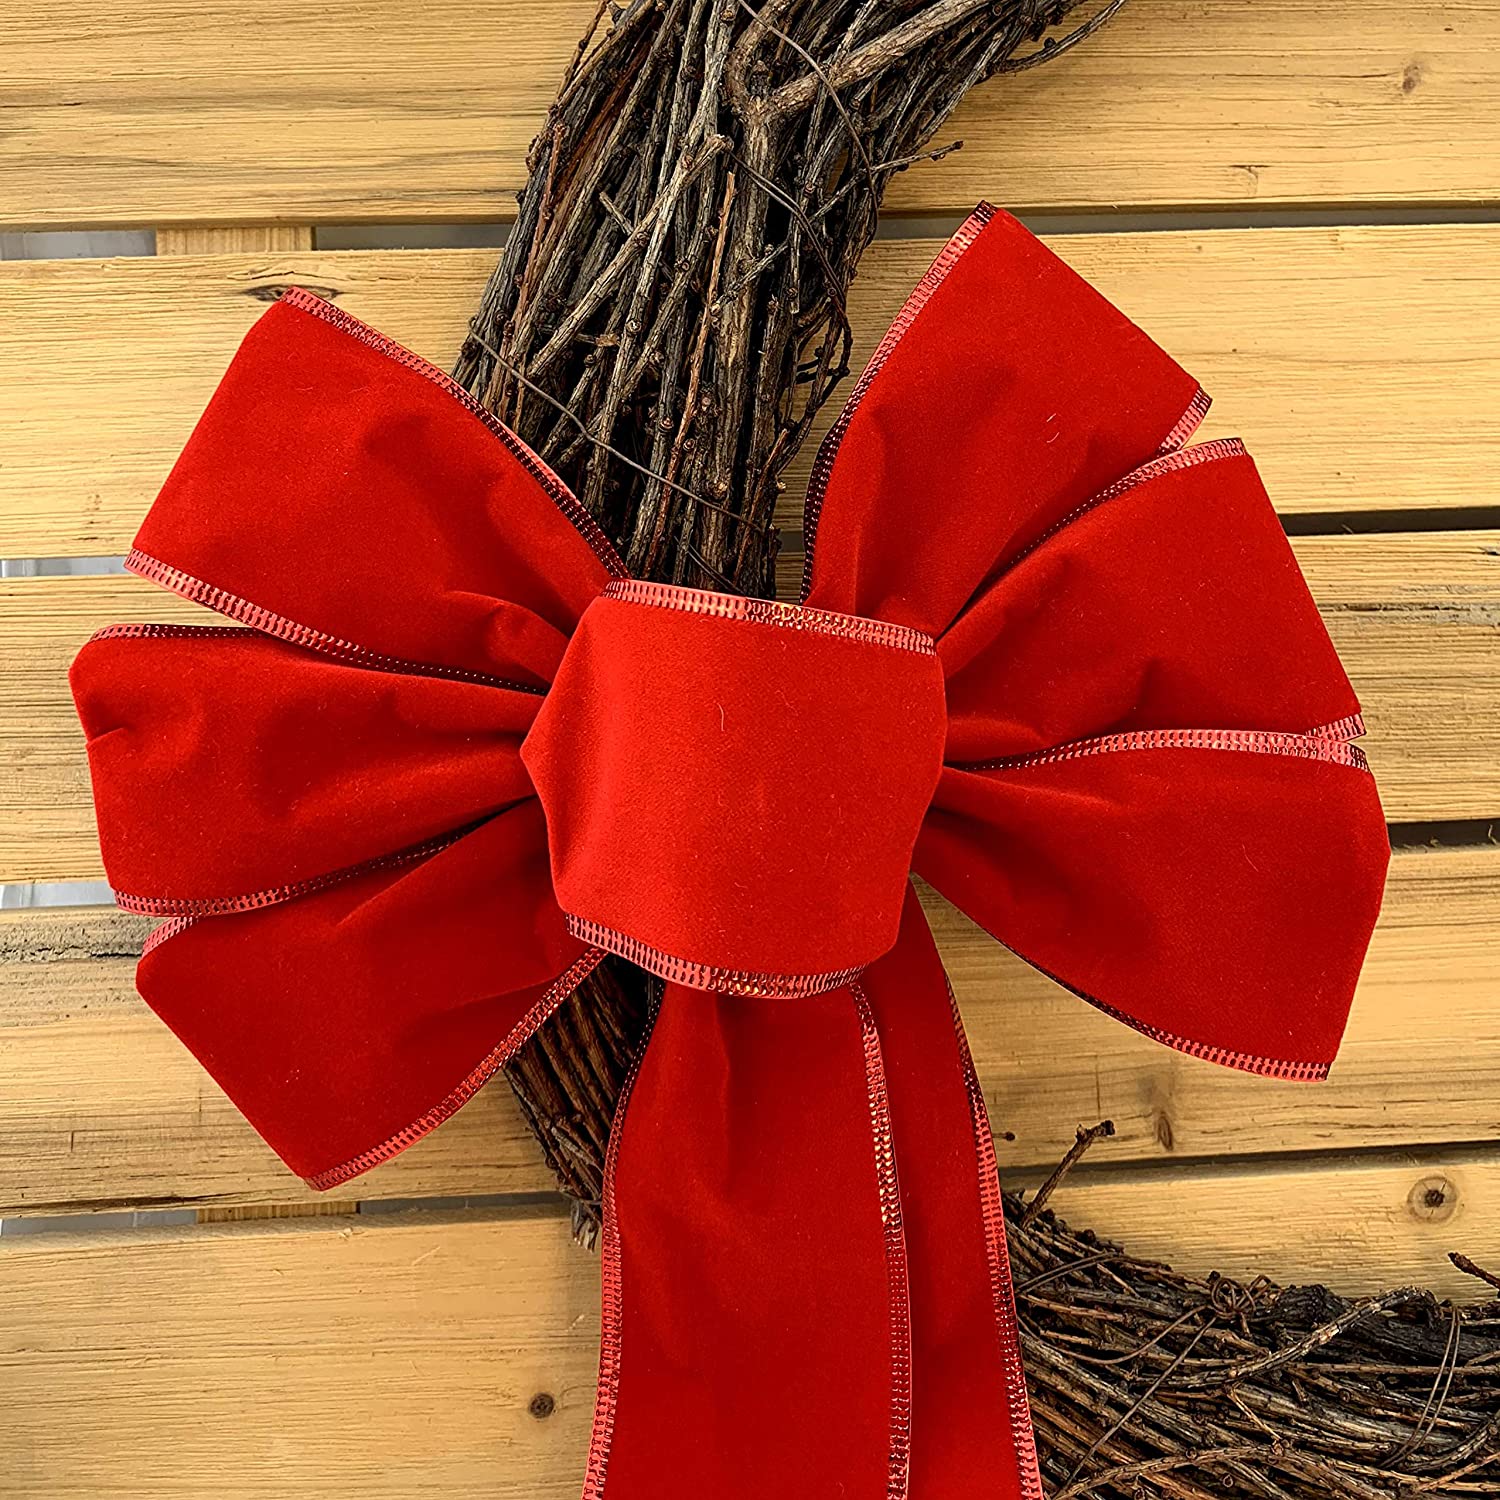 Set of 10 Red Velvet Christmas Wreath Bows, 9x13 - For Garland, Gifts,  Parties - Indoor/Outdoor Holiday Decor